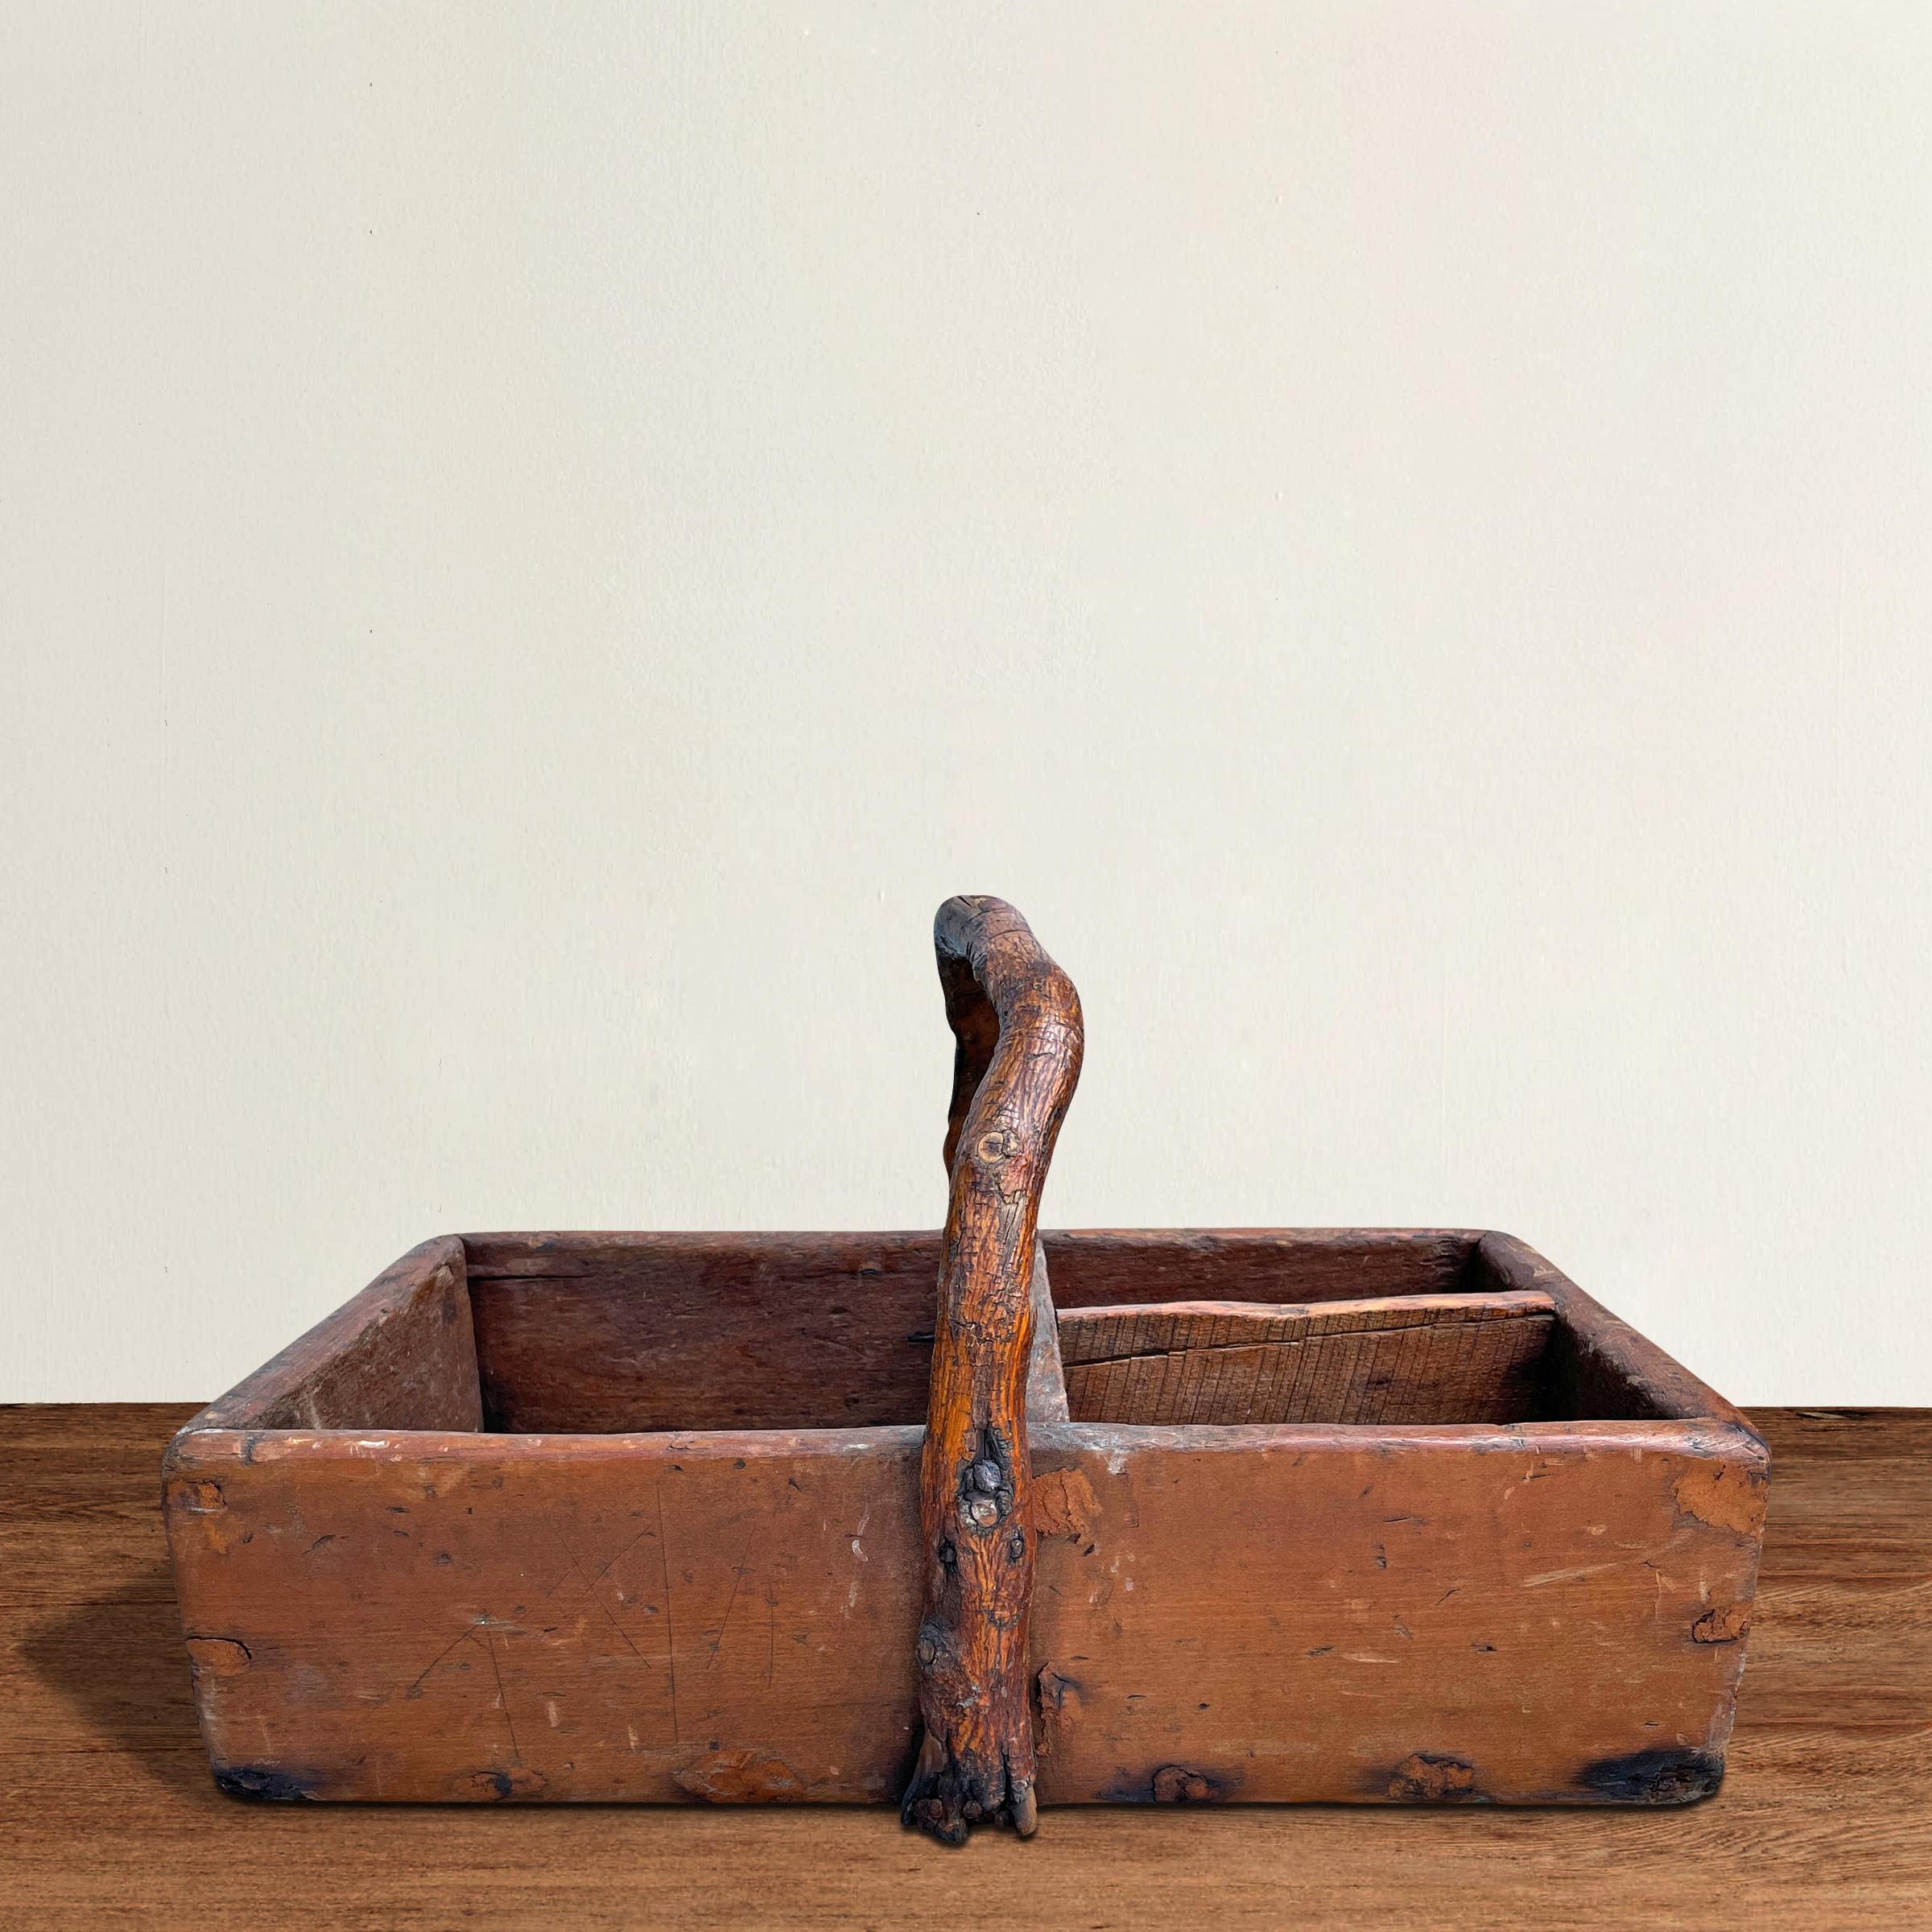 A wonderfully charming 19th century American caddy or tool box with the best whimsical wabi-sabi inspired natural bentwood hickory handle. Perfect for holding napkins, flatware, or other tableware accessories at your next garden party, or filled